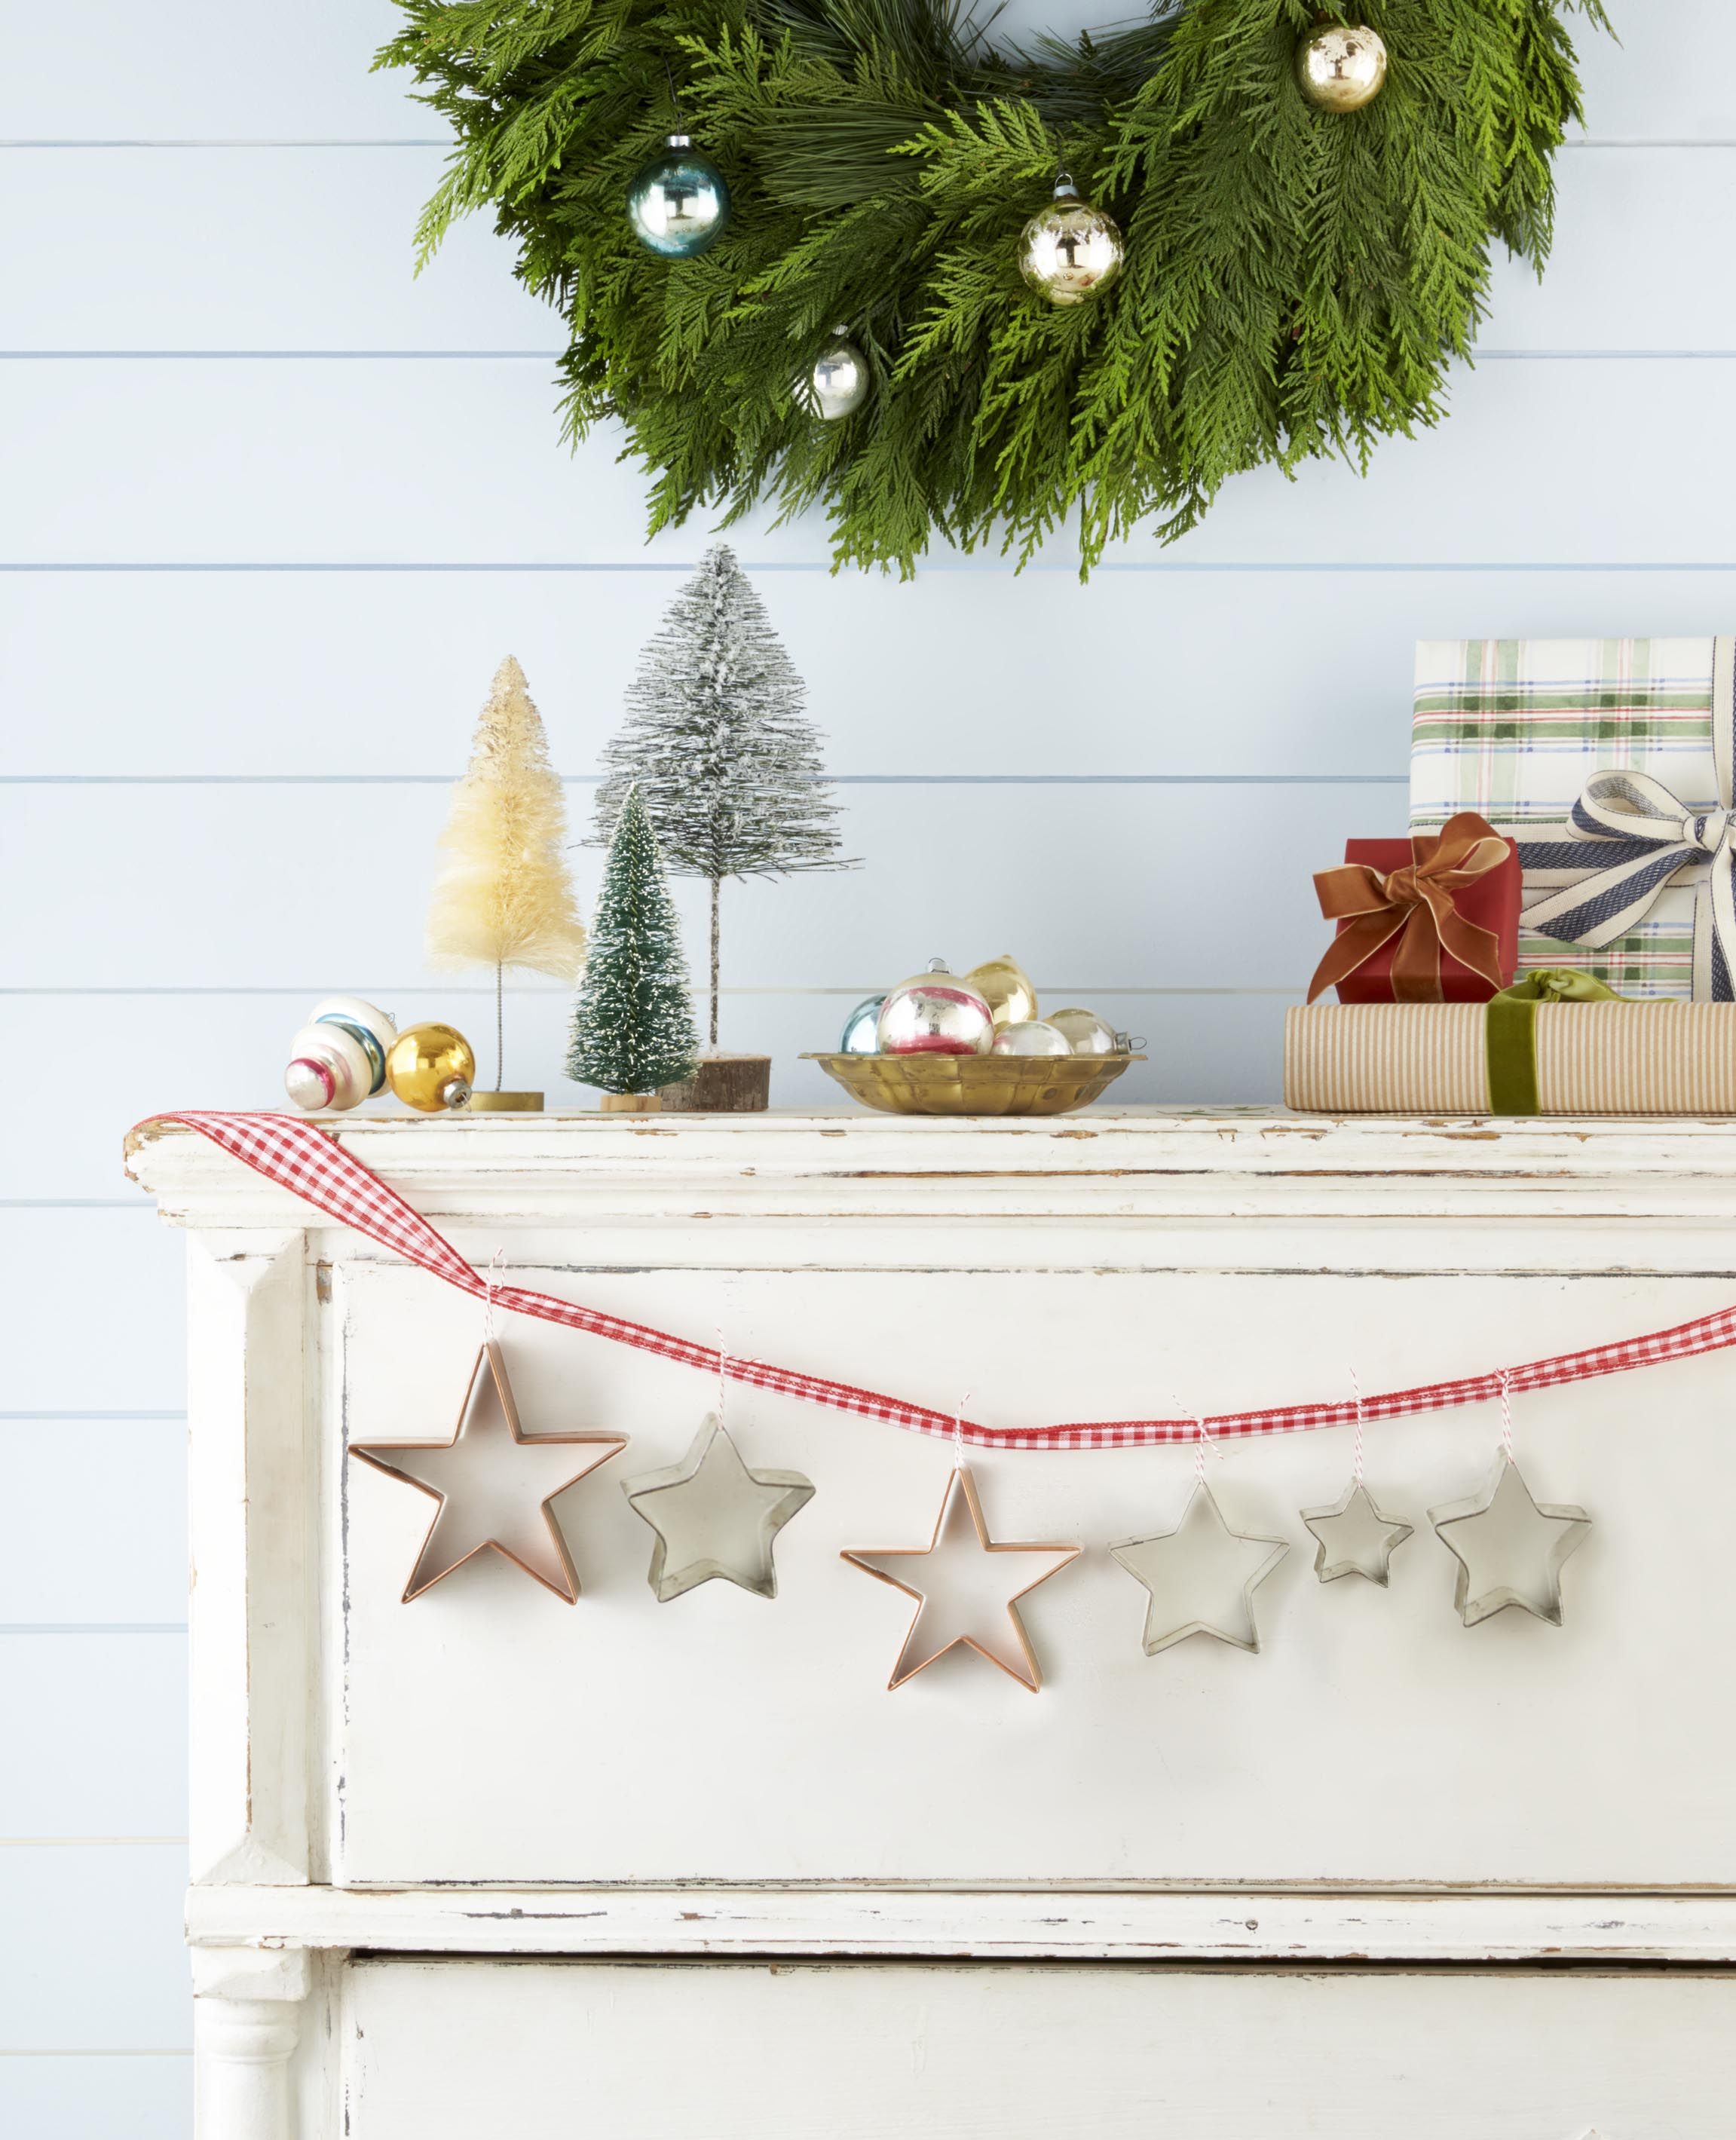 DIY Simple Garland From an Old Christmas Tree - HubPages